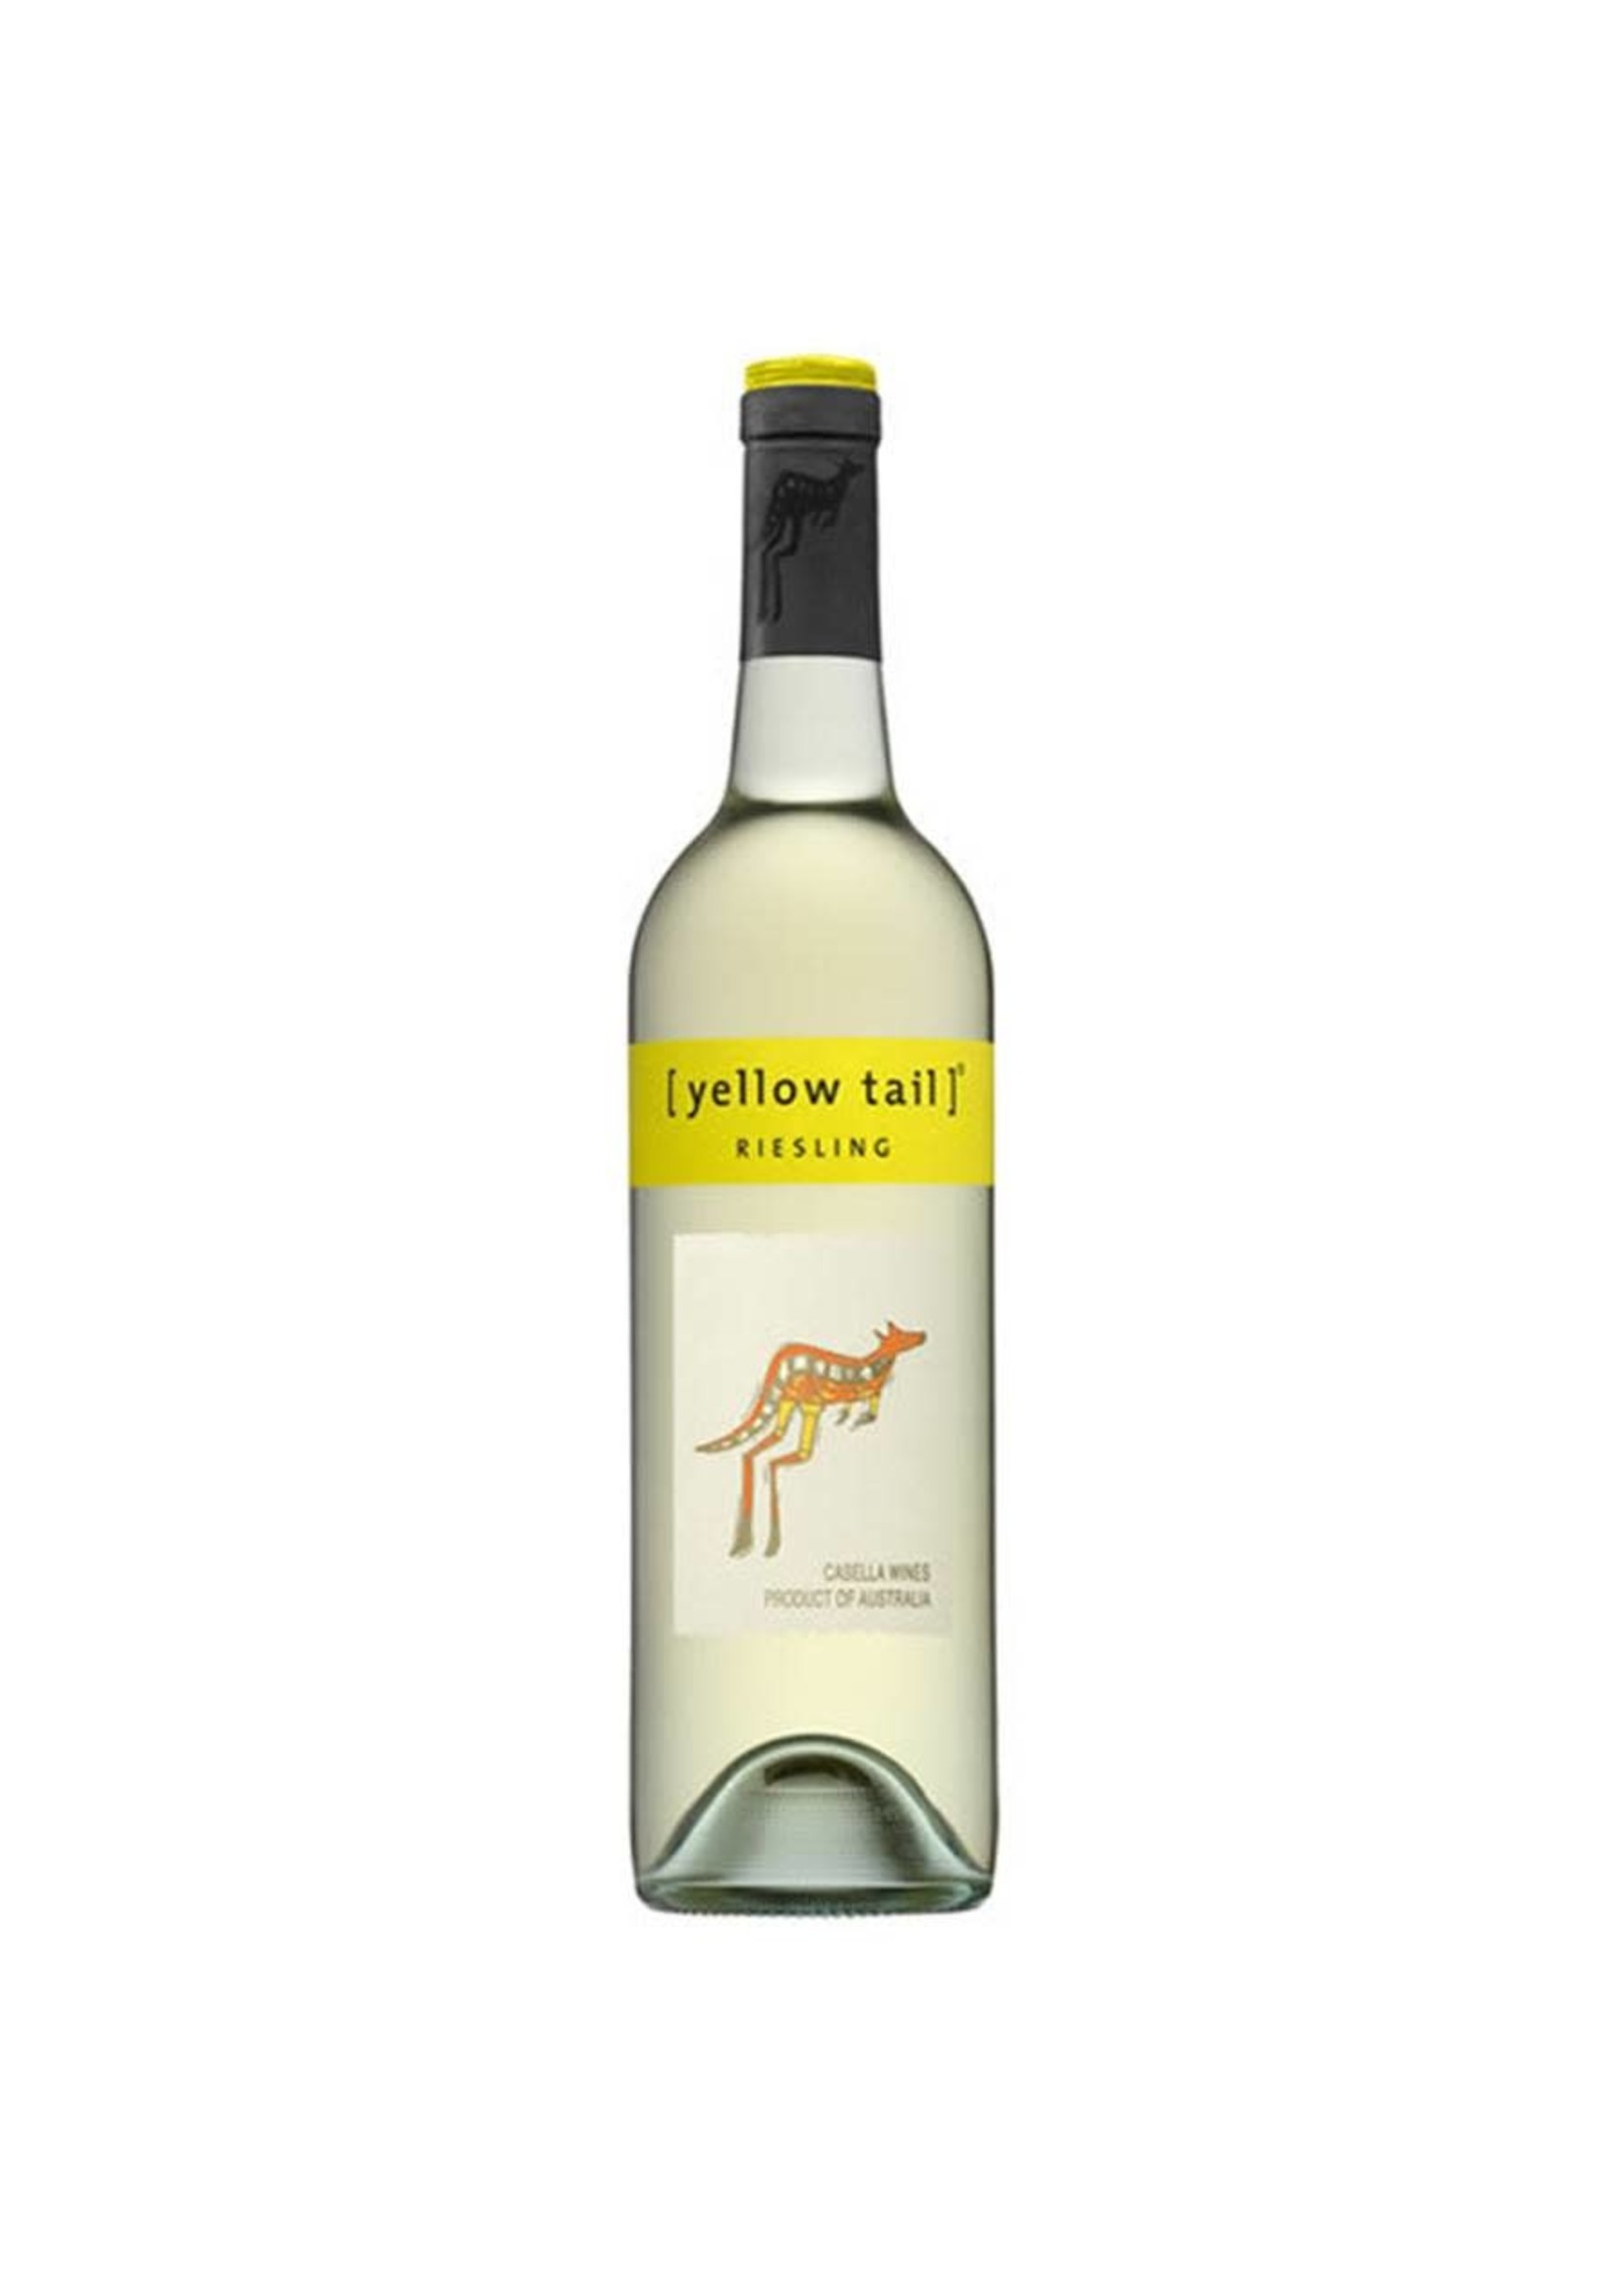 YELLOW TAIL YELLOW TAIL	RIESLING	.750L